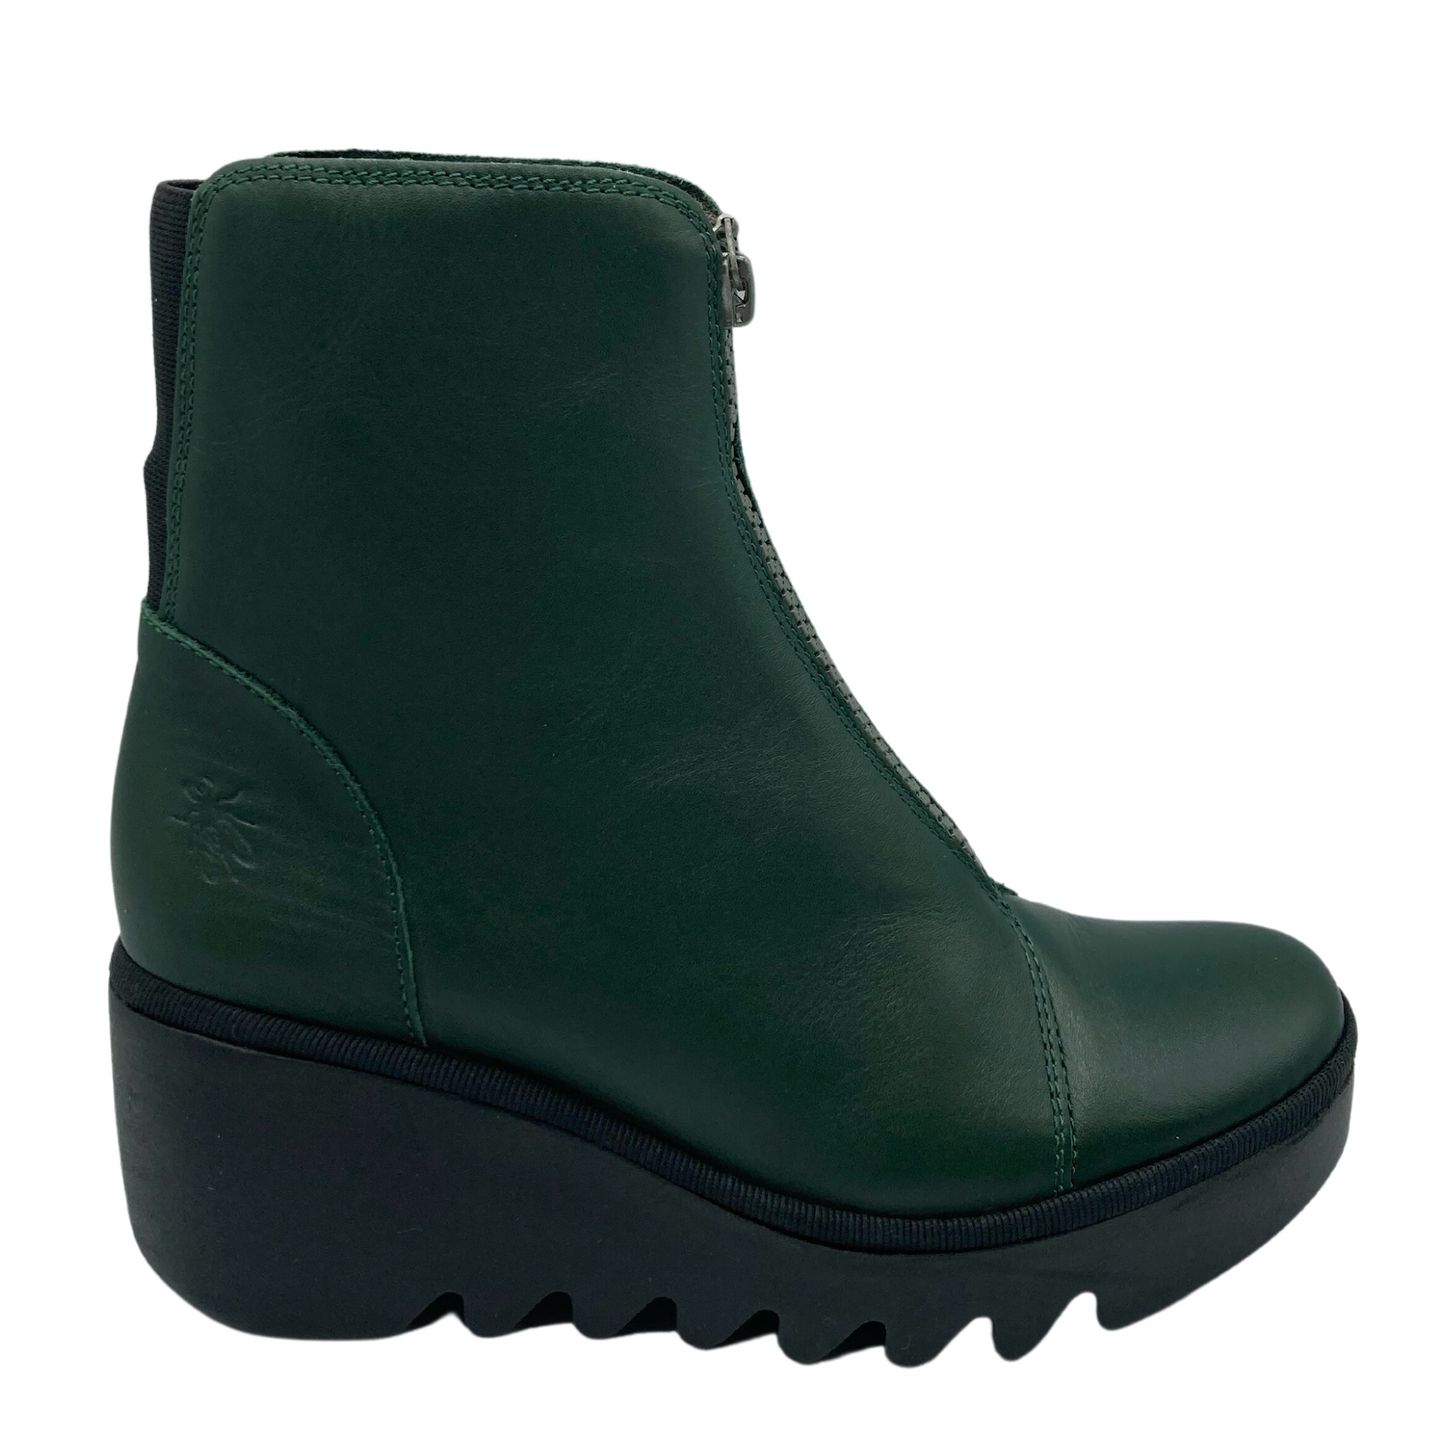 Right facing view of green leather short boot with cleated black wedge heel